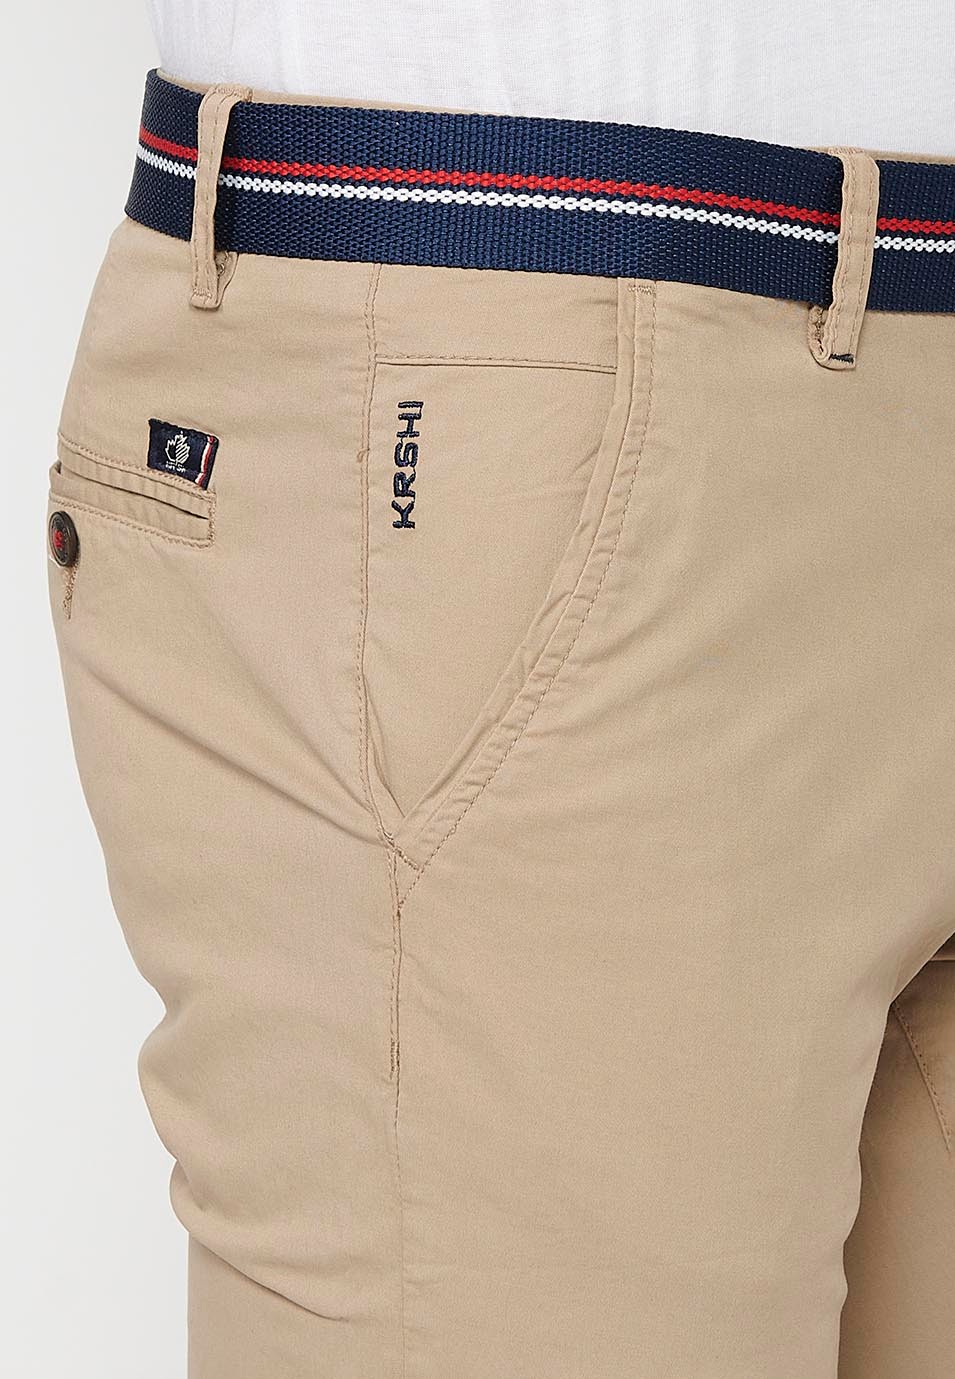 Shorts with a turn-up finish with front closure with zipper and button and belt in Beige Color for Men 8